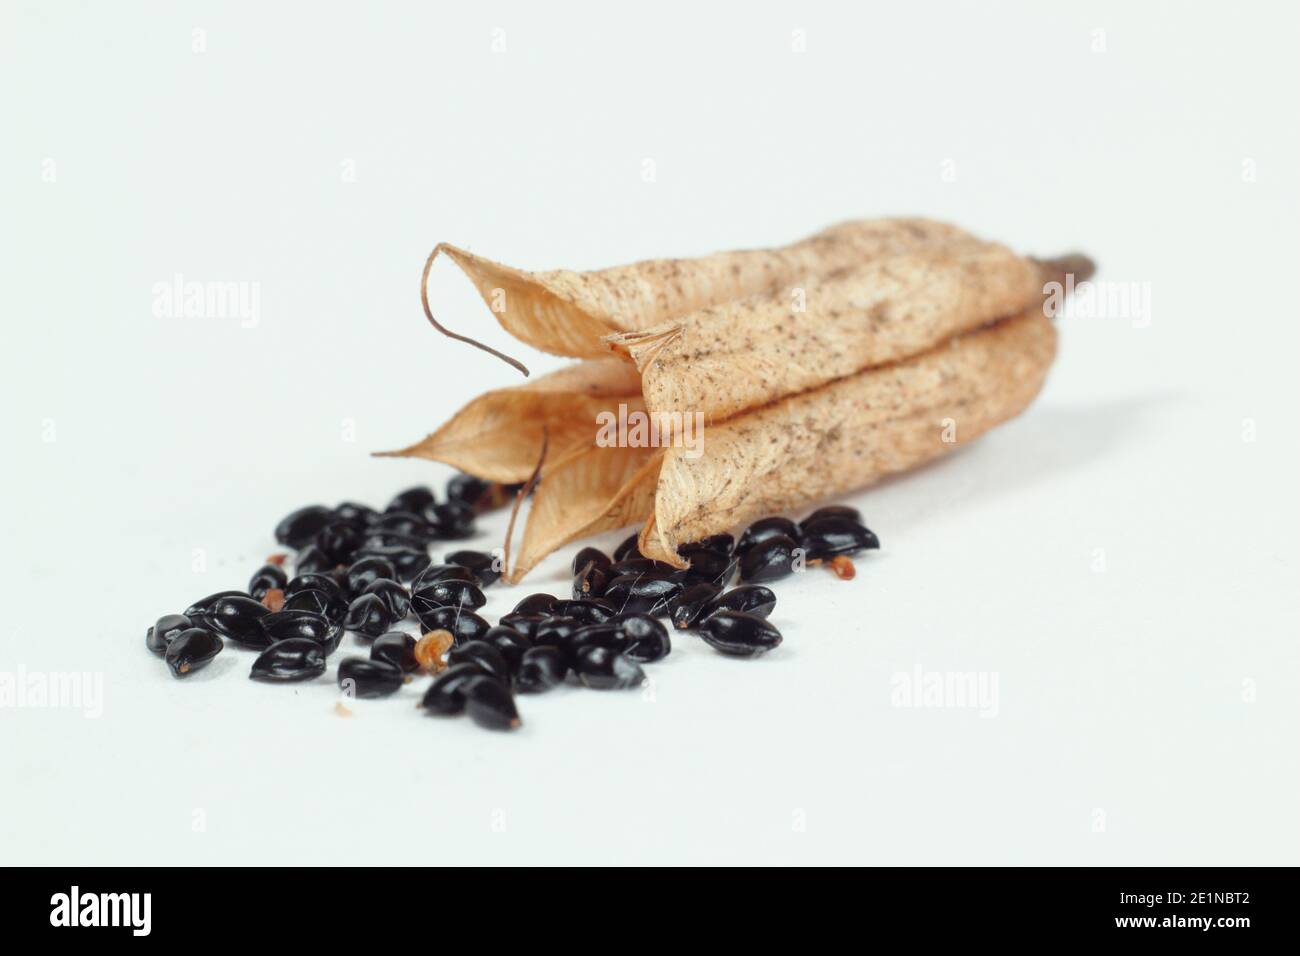 Aquilegia seed pods with seed isolated on white background. Aquilegia vulgaris also called Columbine. Stock Photo